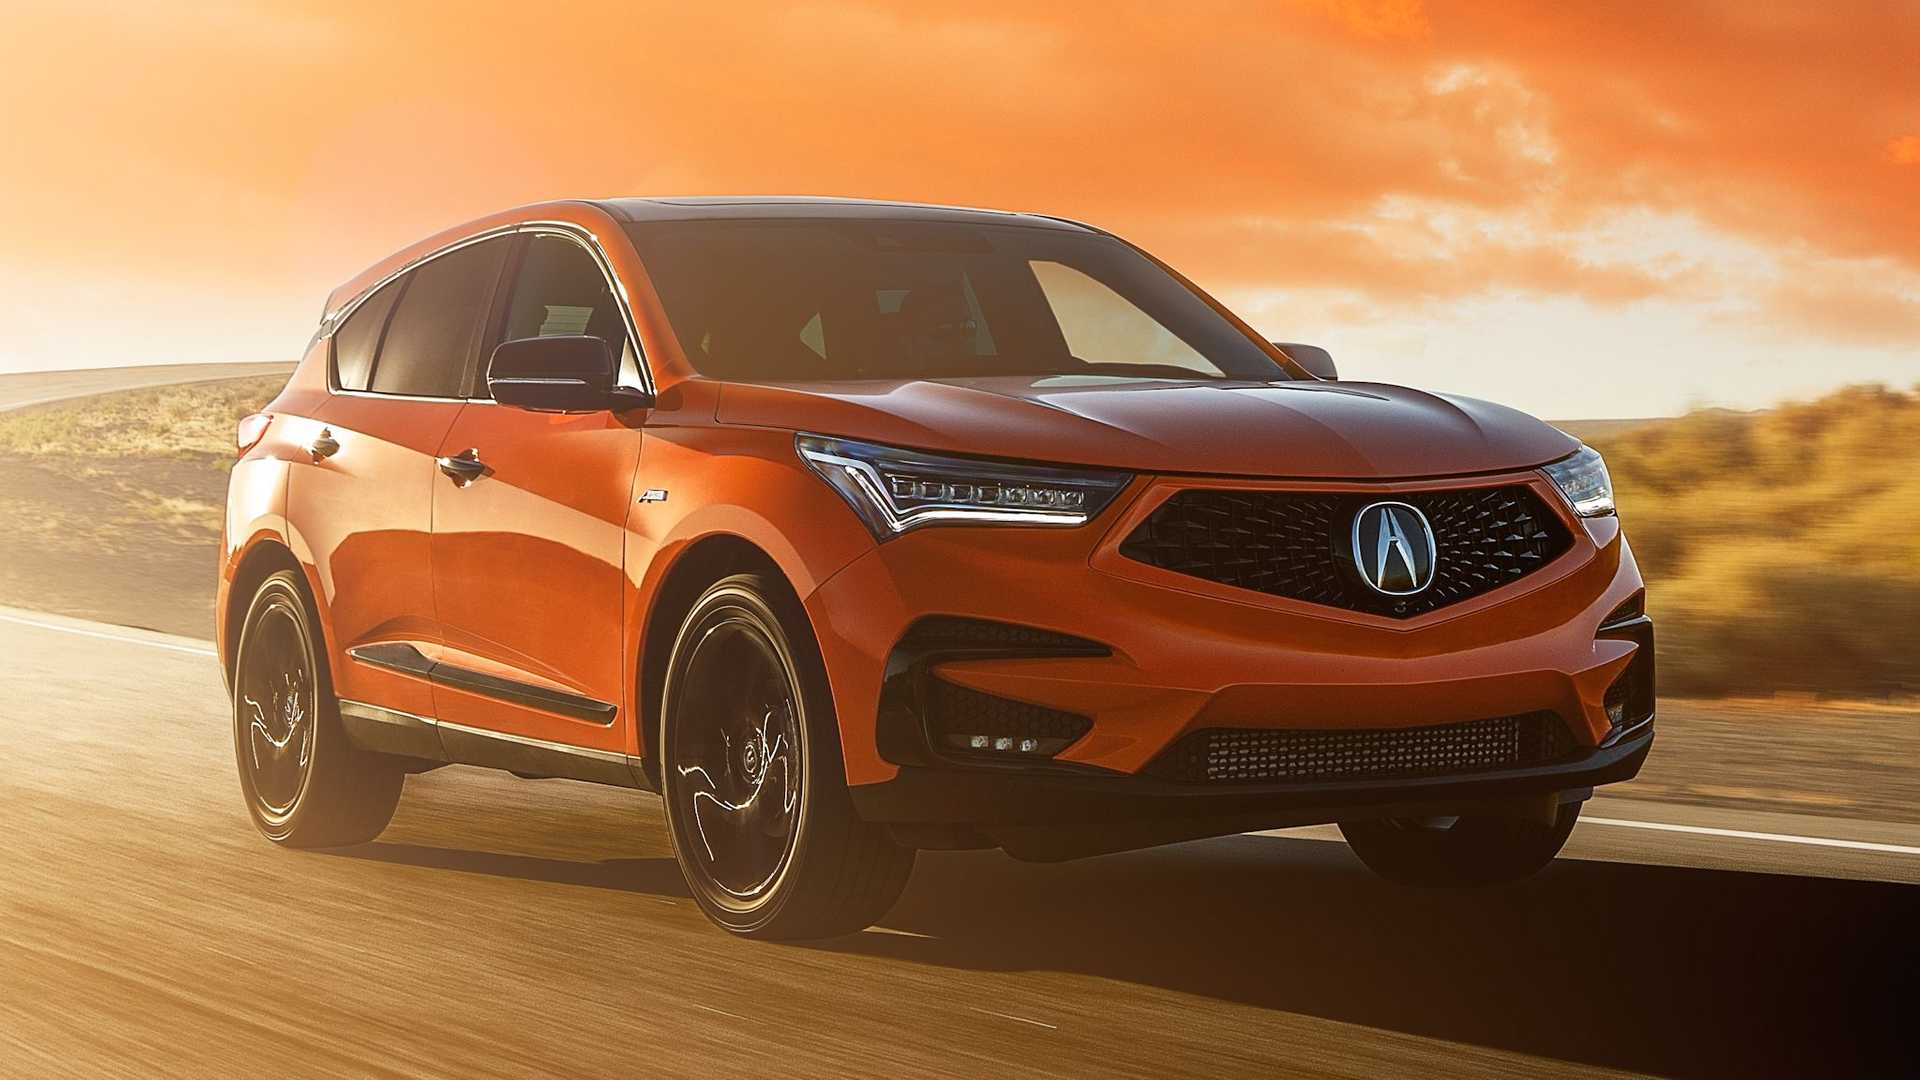 https://s1.cdn.autoevolution.com/images/news/2021-acura-rdx-pmc-edition-is-a-spicy-pumpkin-in-nsx-thermal-orange-149071_1.jpg